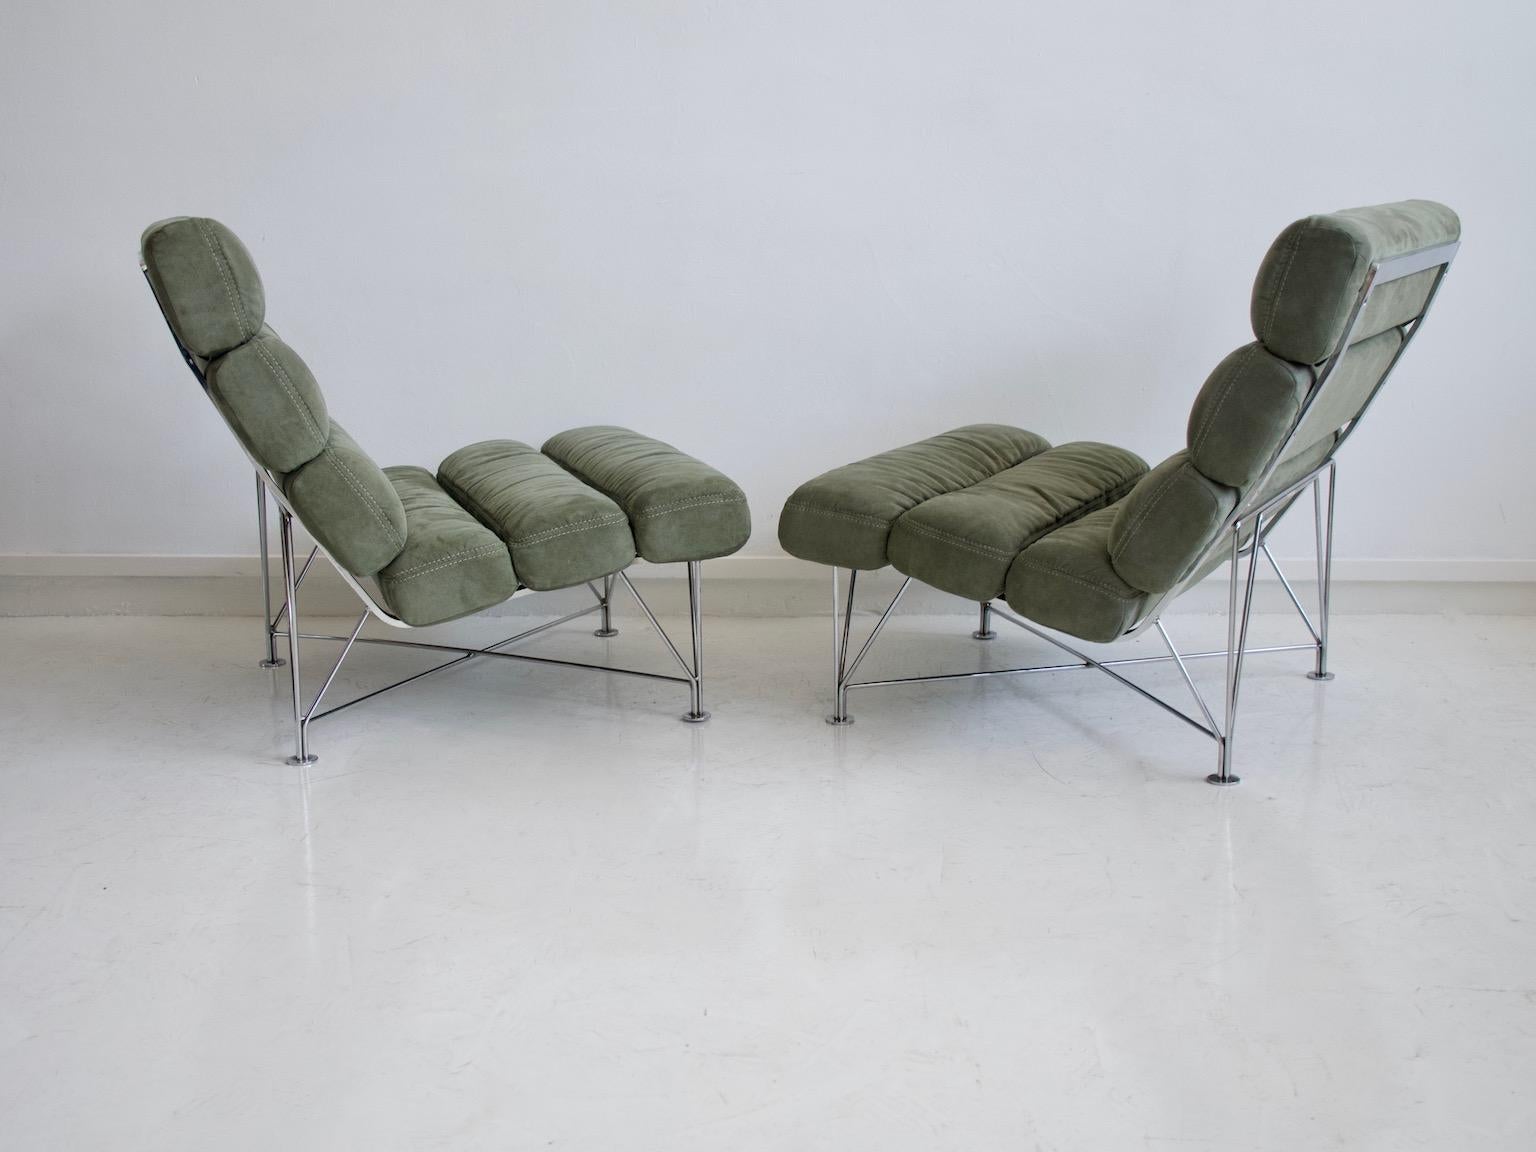 Pair of Green Lounge Chairs with Steel Frame by DUX Design Team For Sale 1